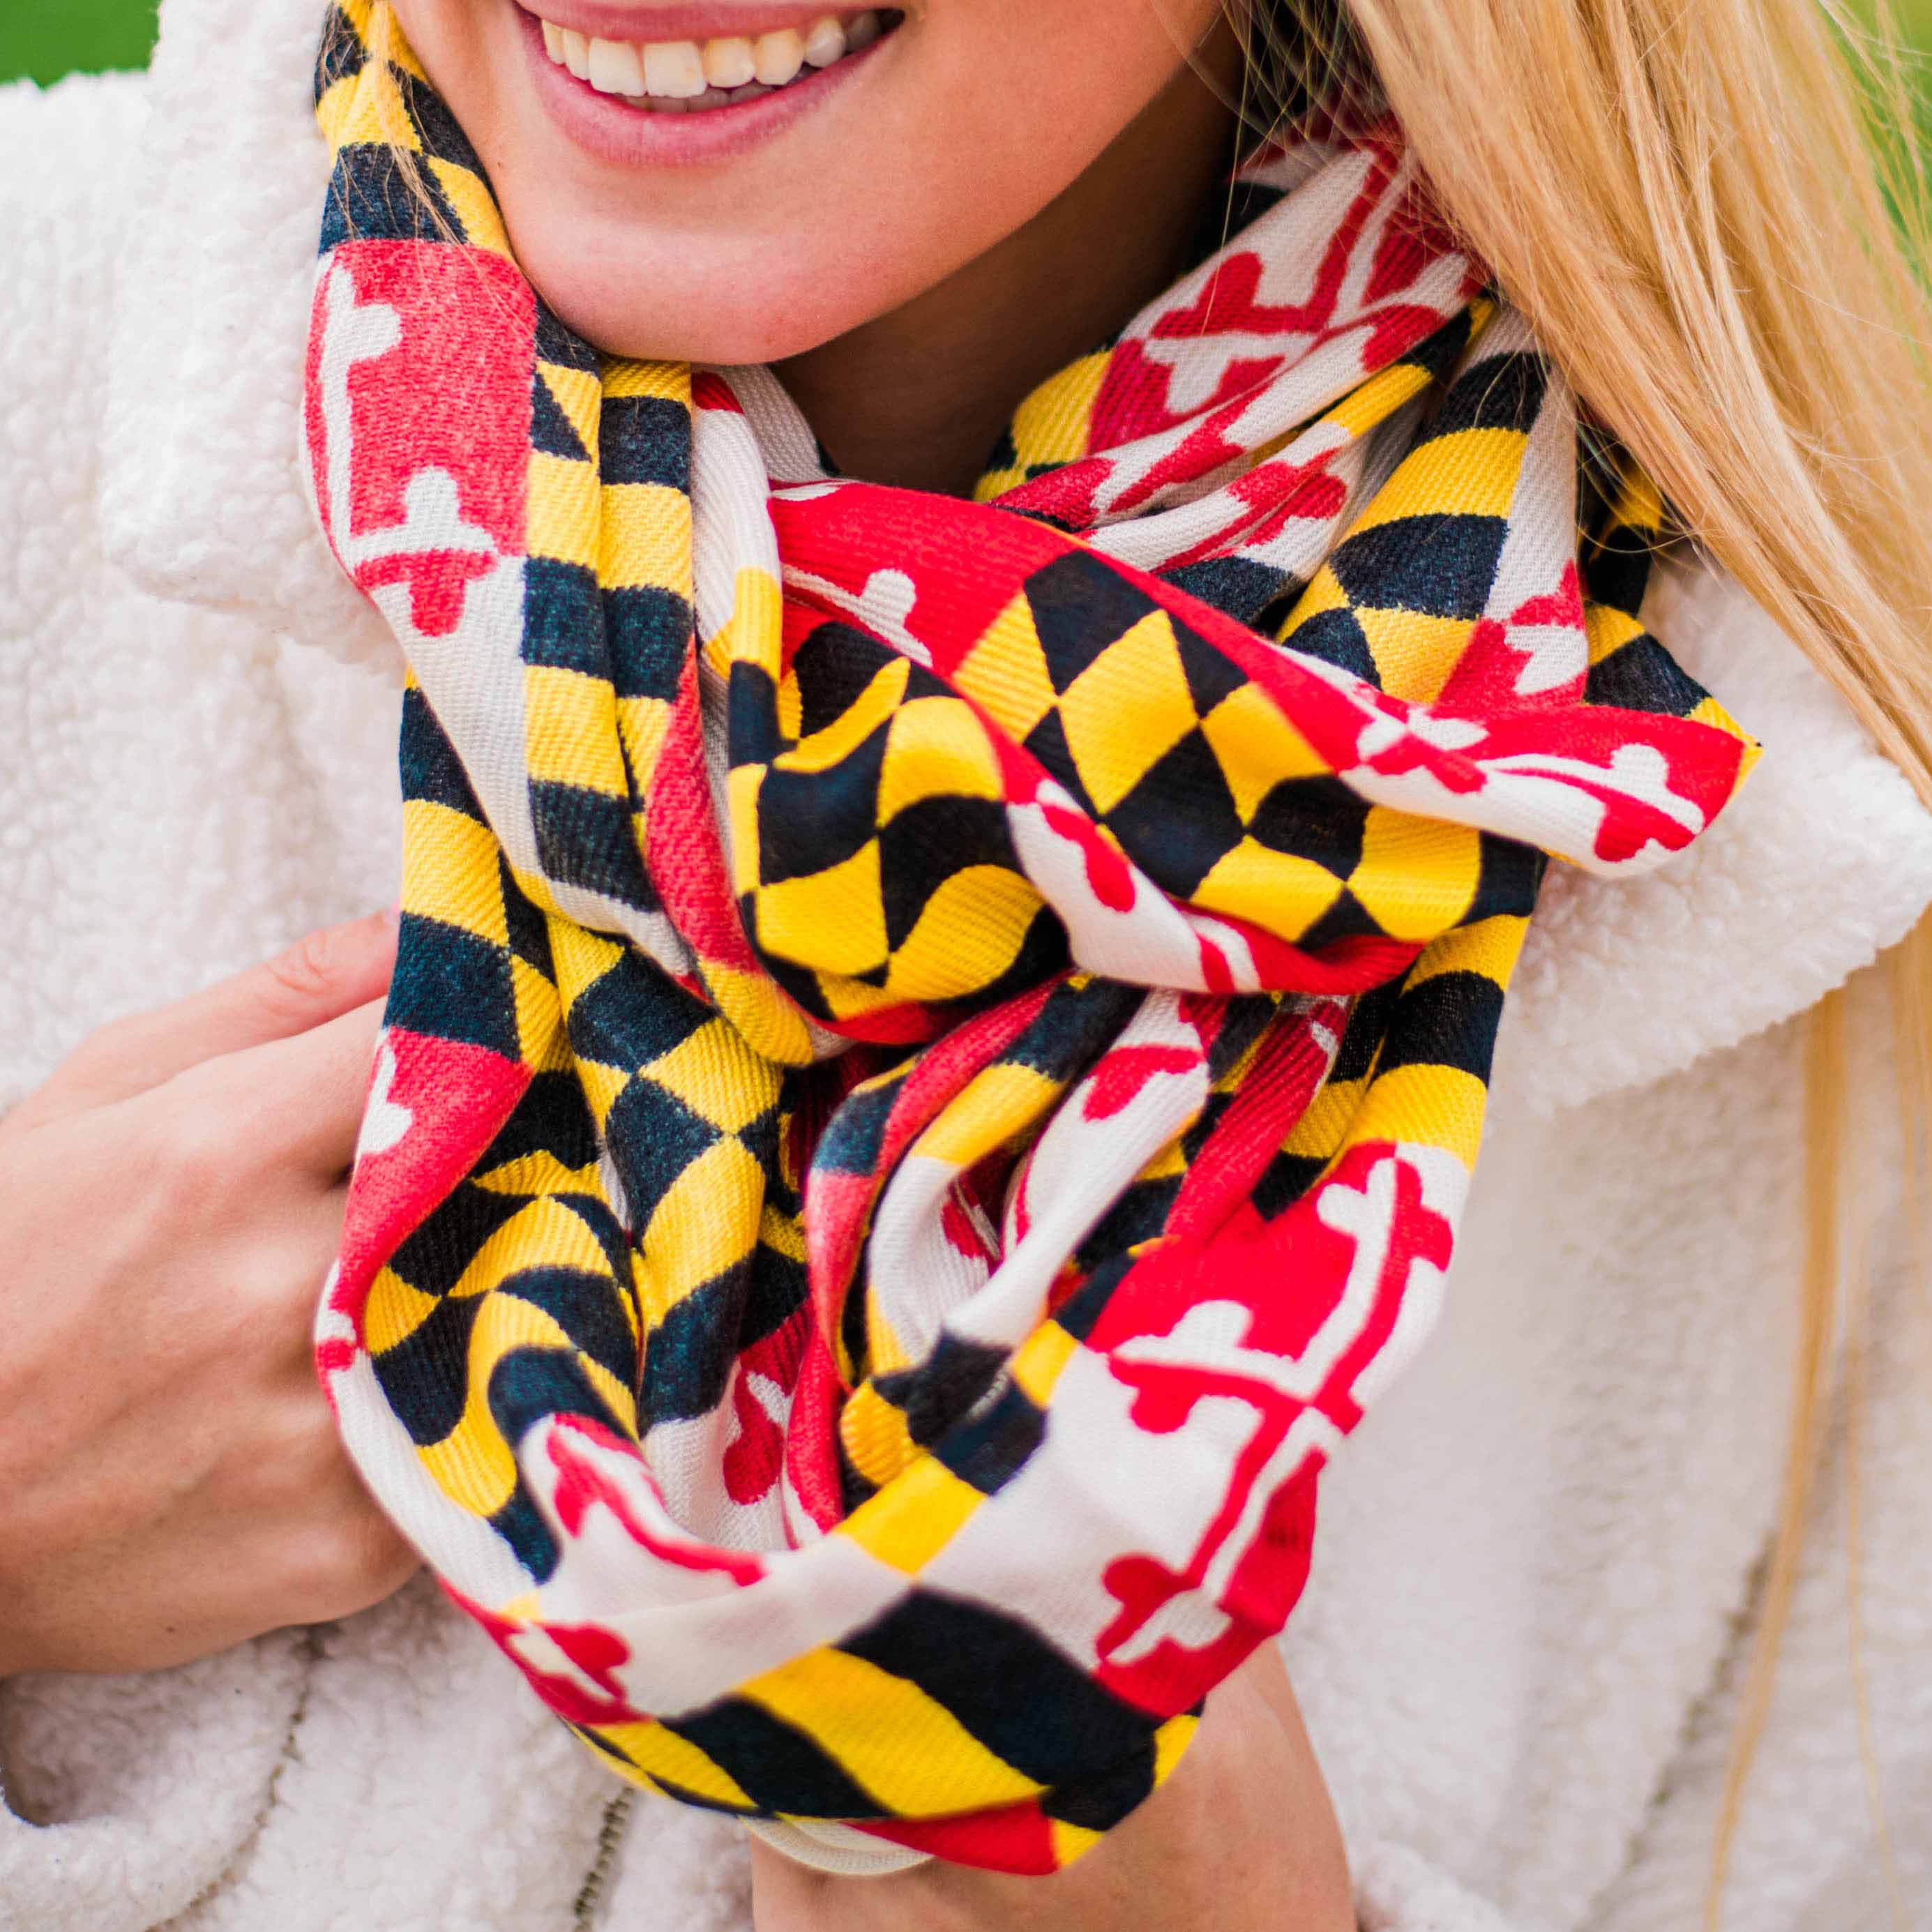 Maryland Flag / Infinity Scarf - Route One Apparel